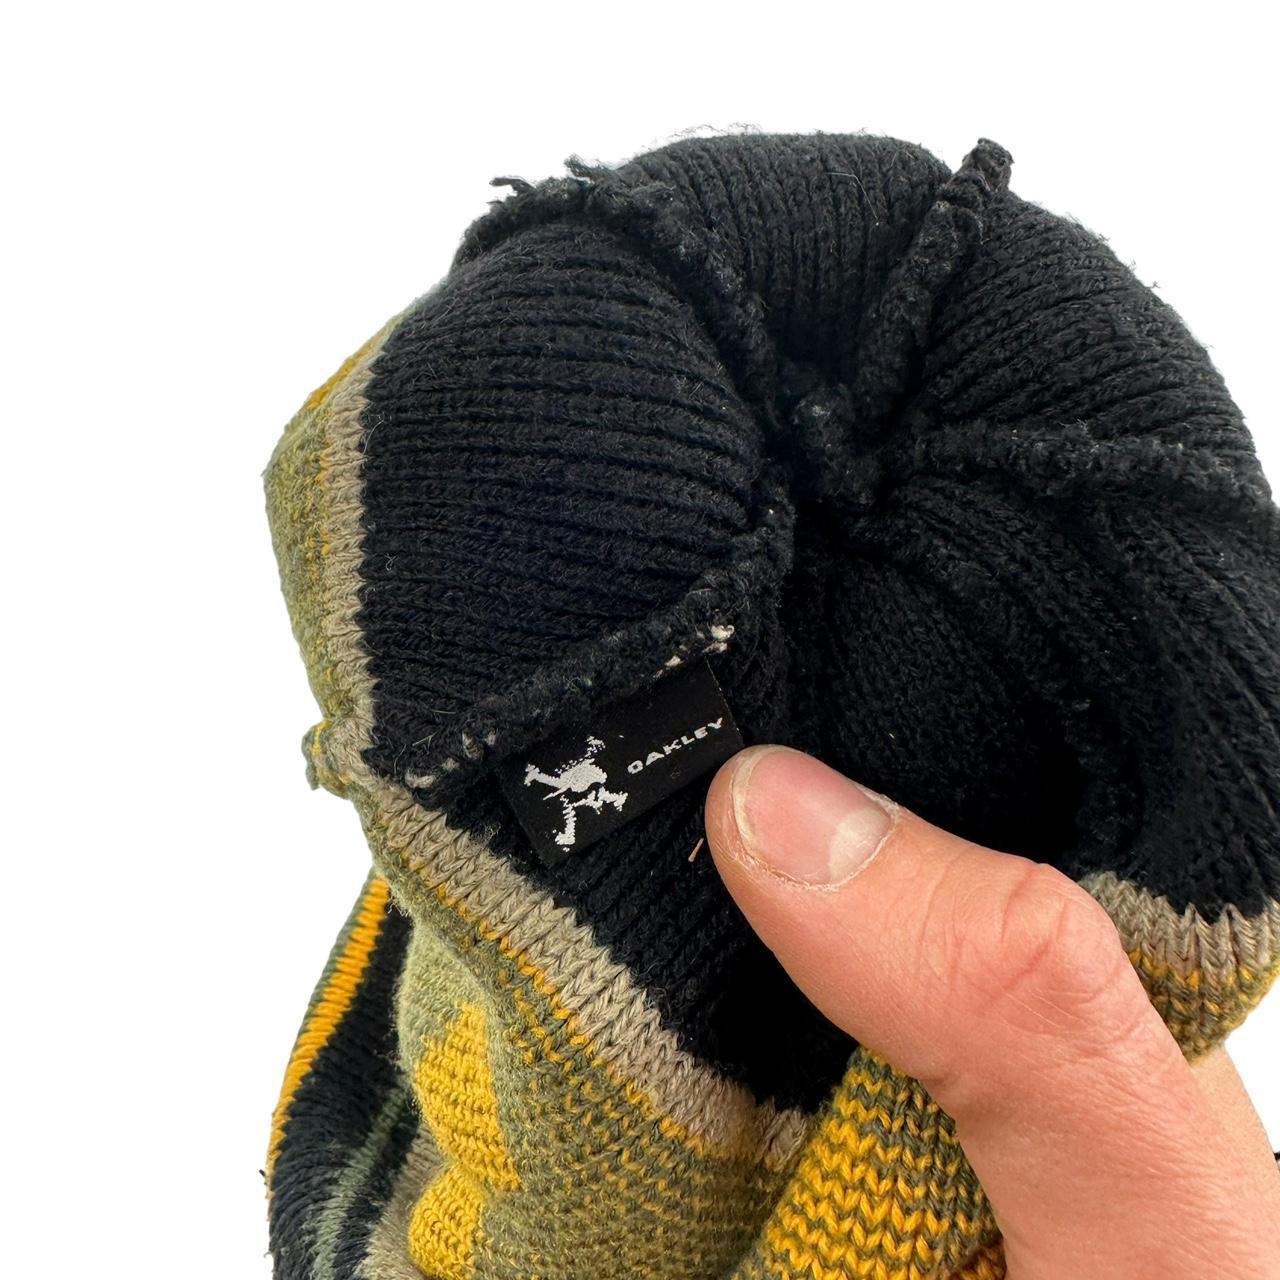 Oakley knitted bobble hat - Known Source